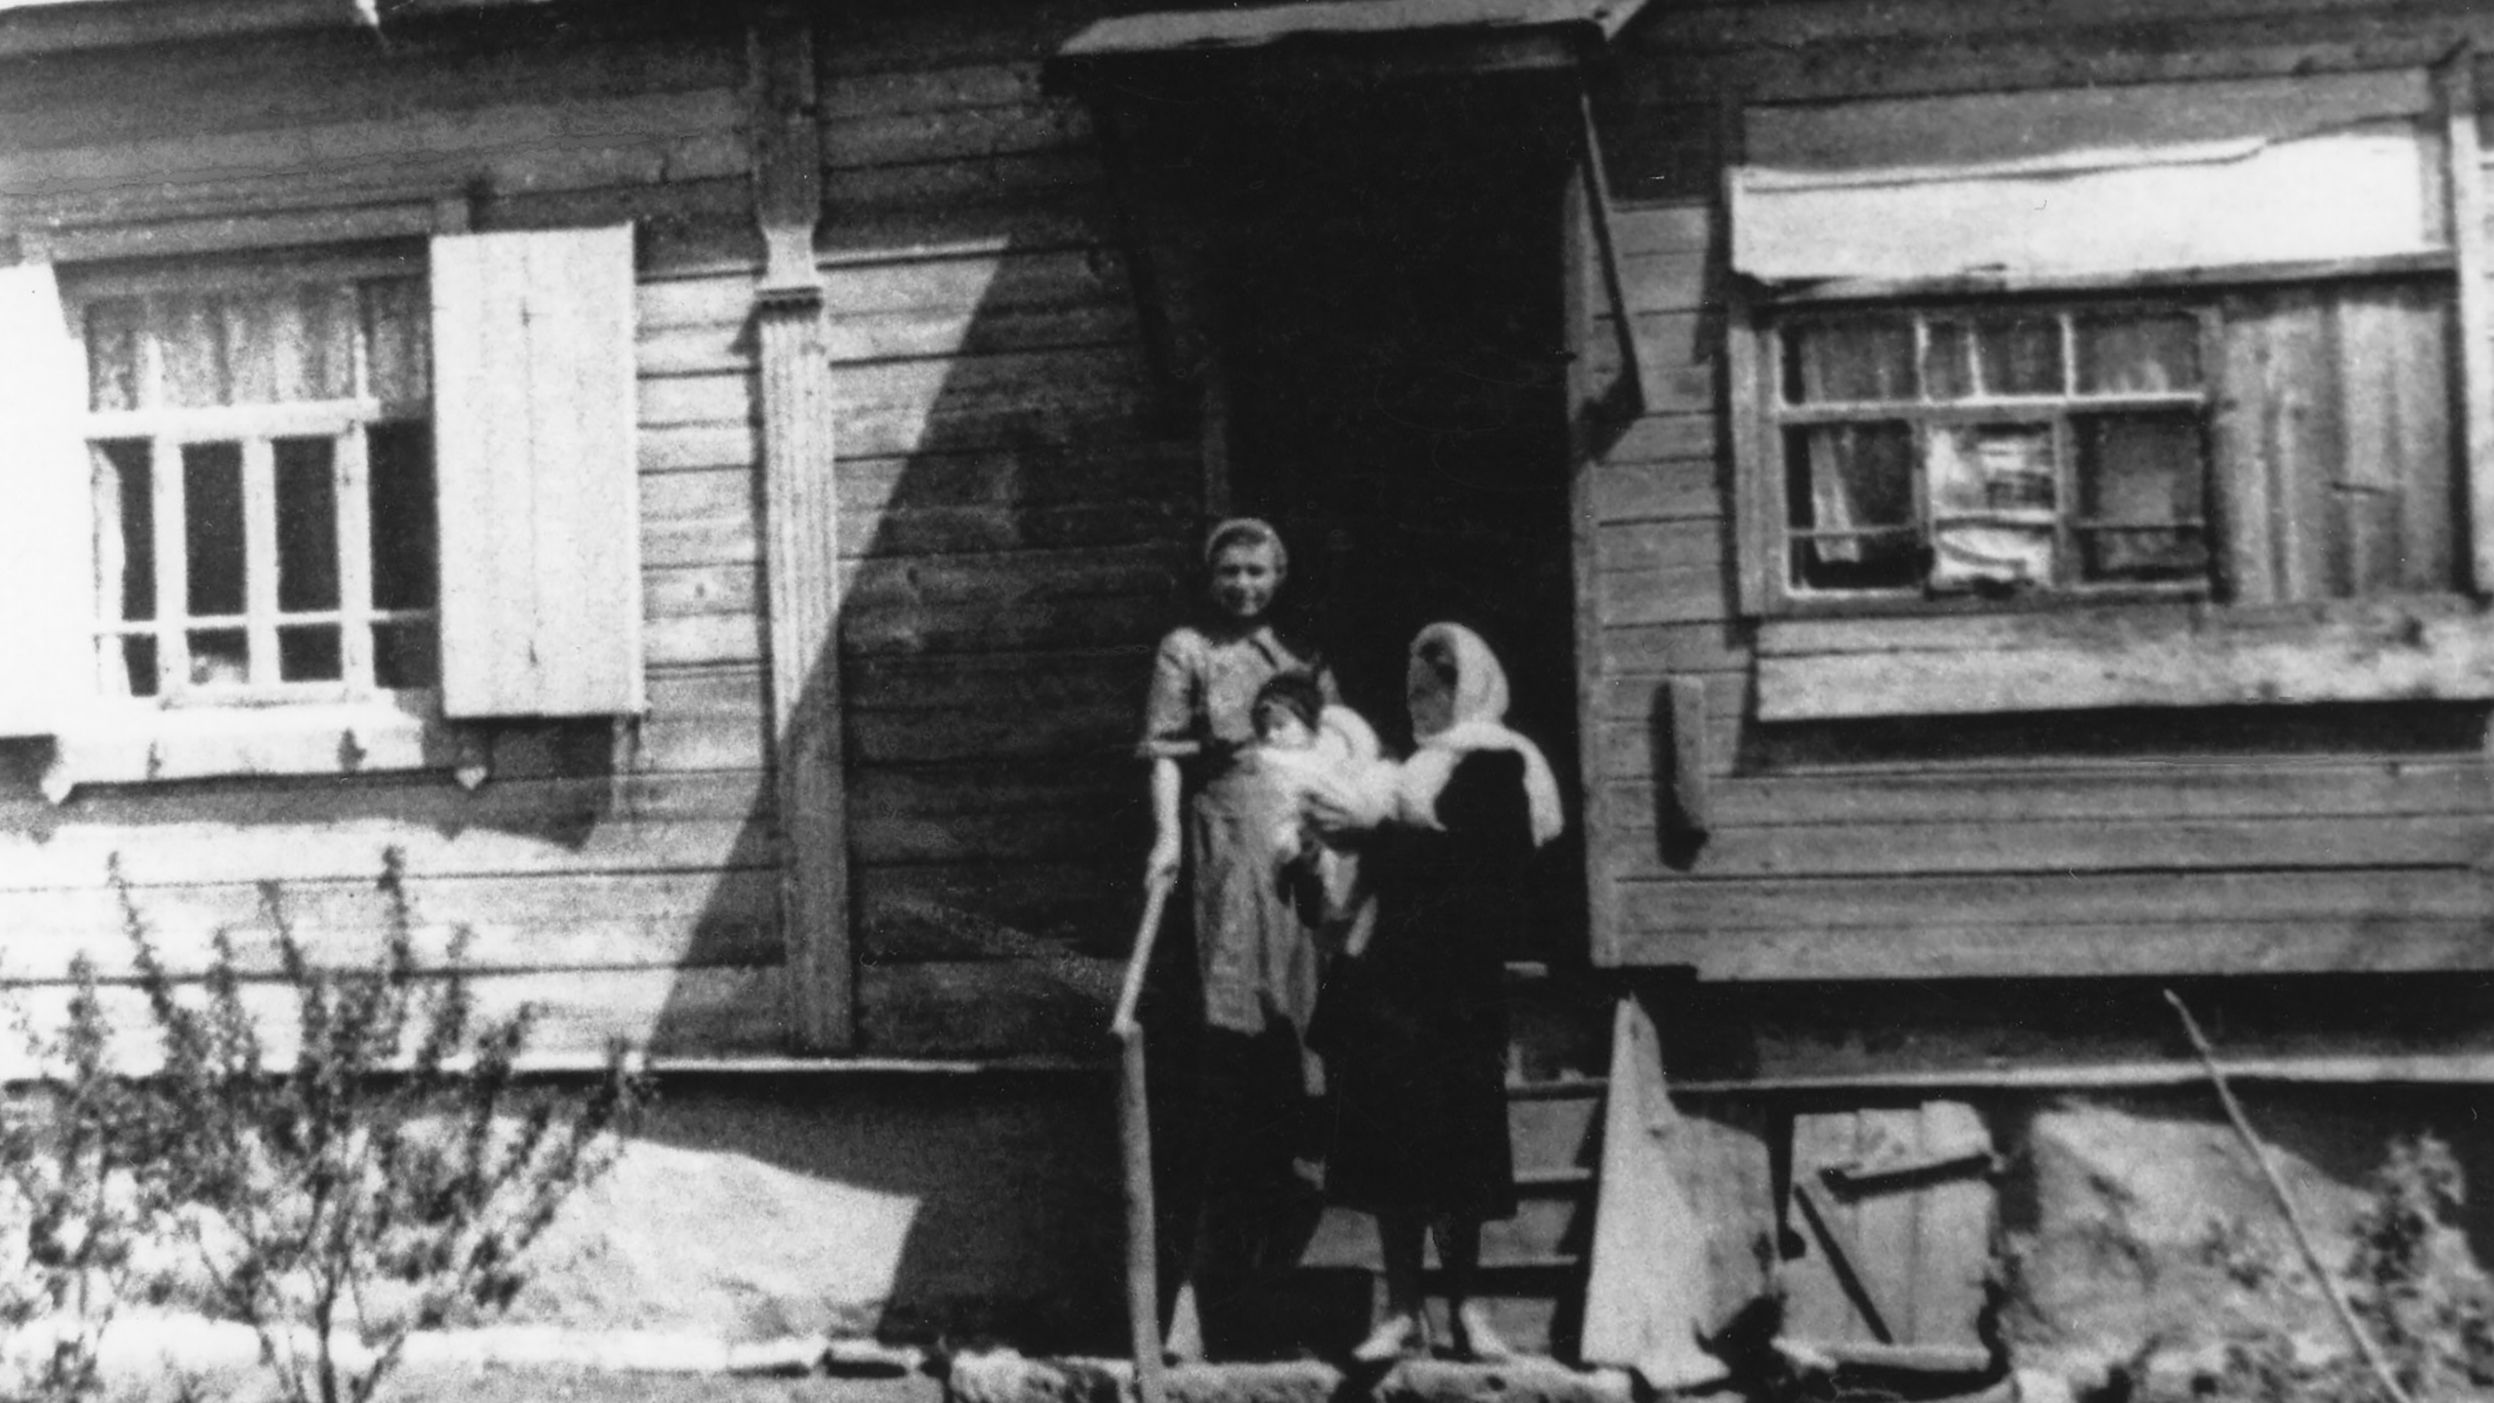 Gorbachev had humble beginnings: He was born into a peasant family in Privolnoye on March 2, 1931. Here, he's with his parents in Privolnoye.